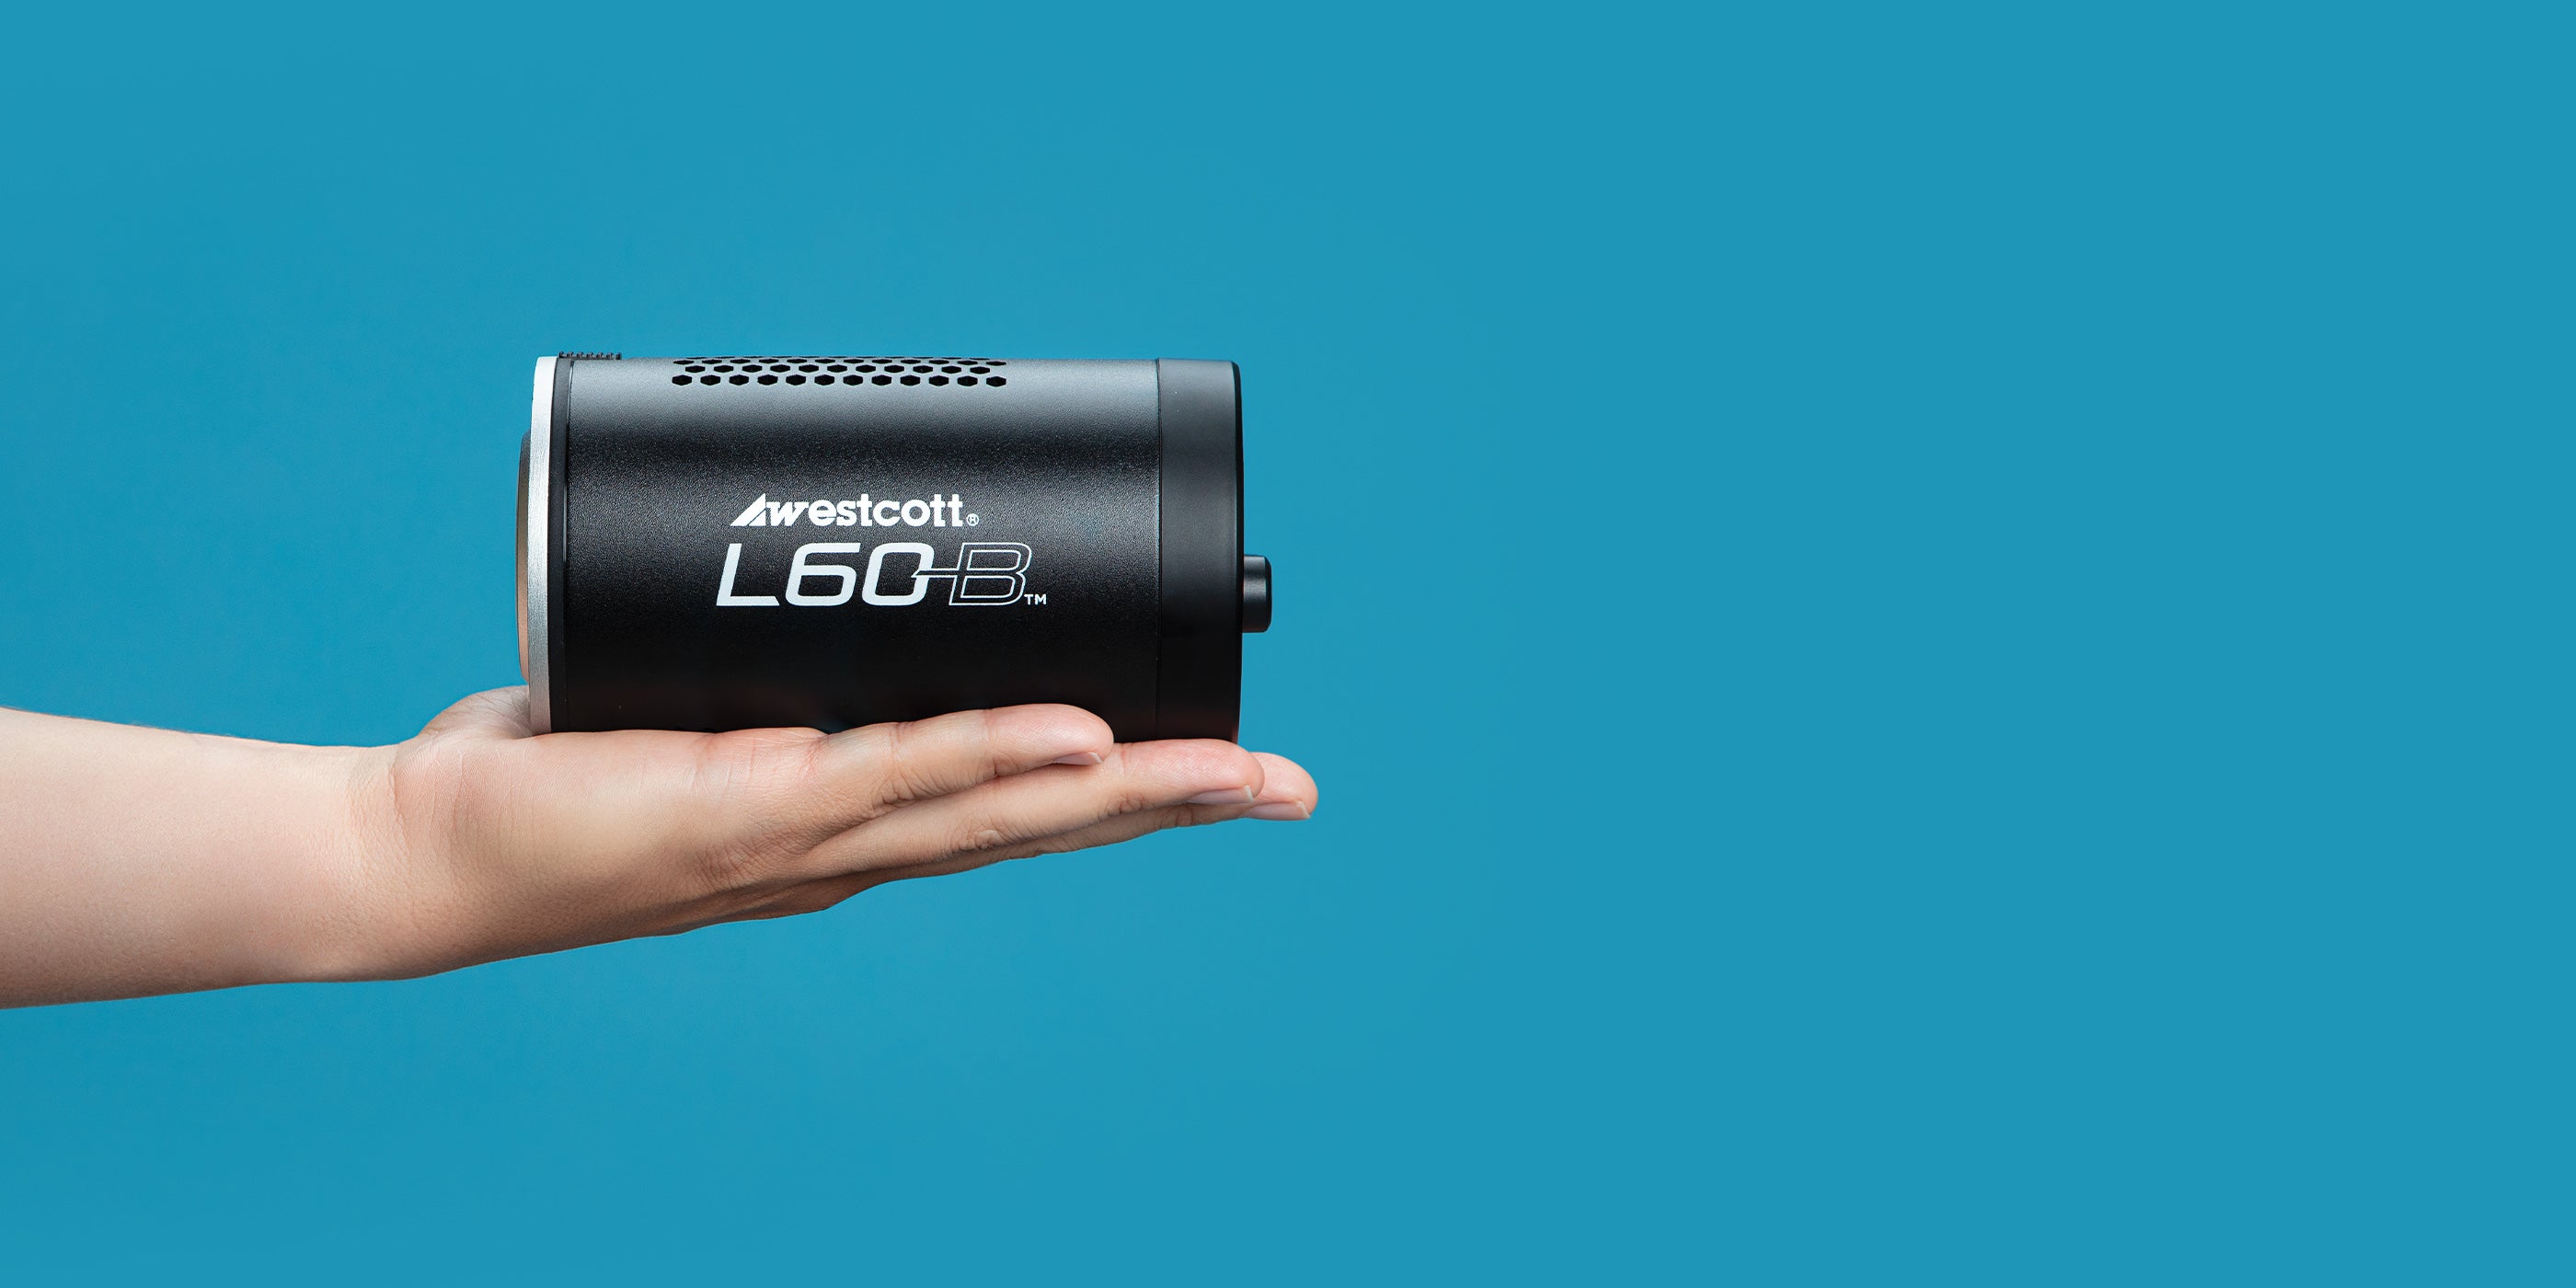 L60-B COB for Photo and Video Shown Held in Palm of Hand